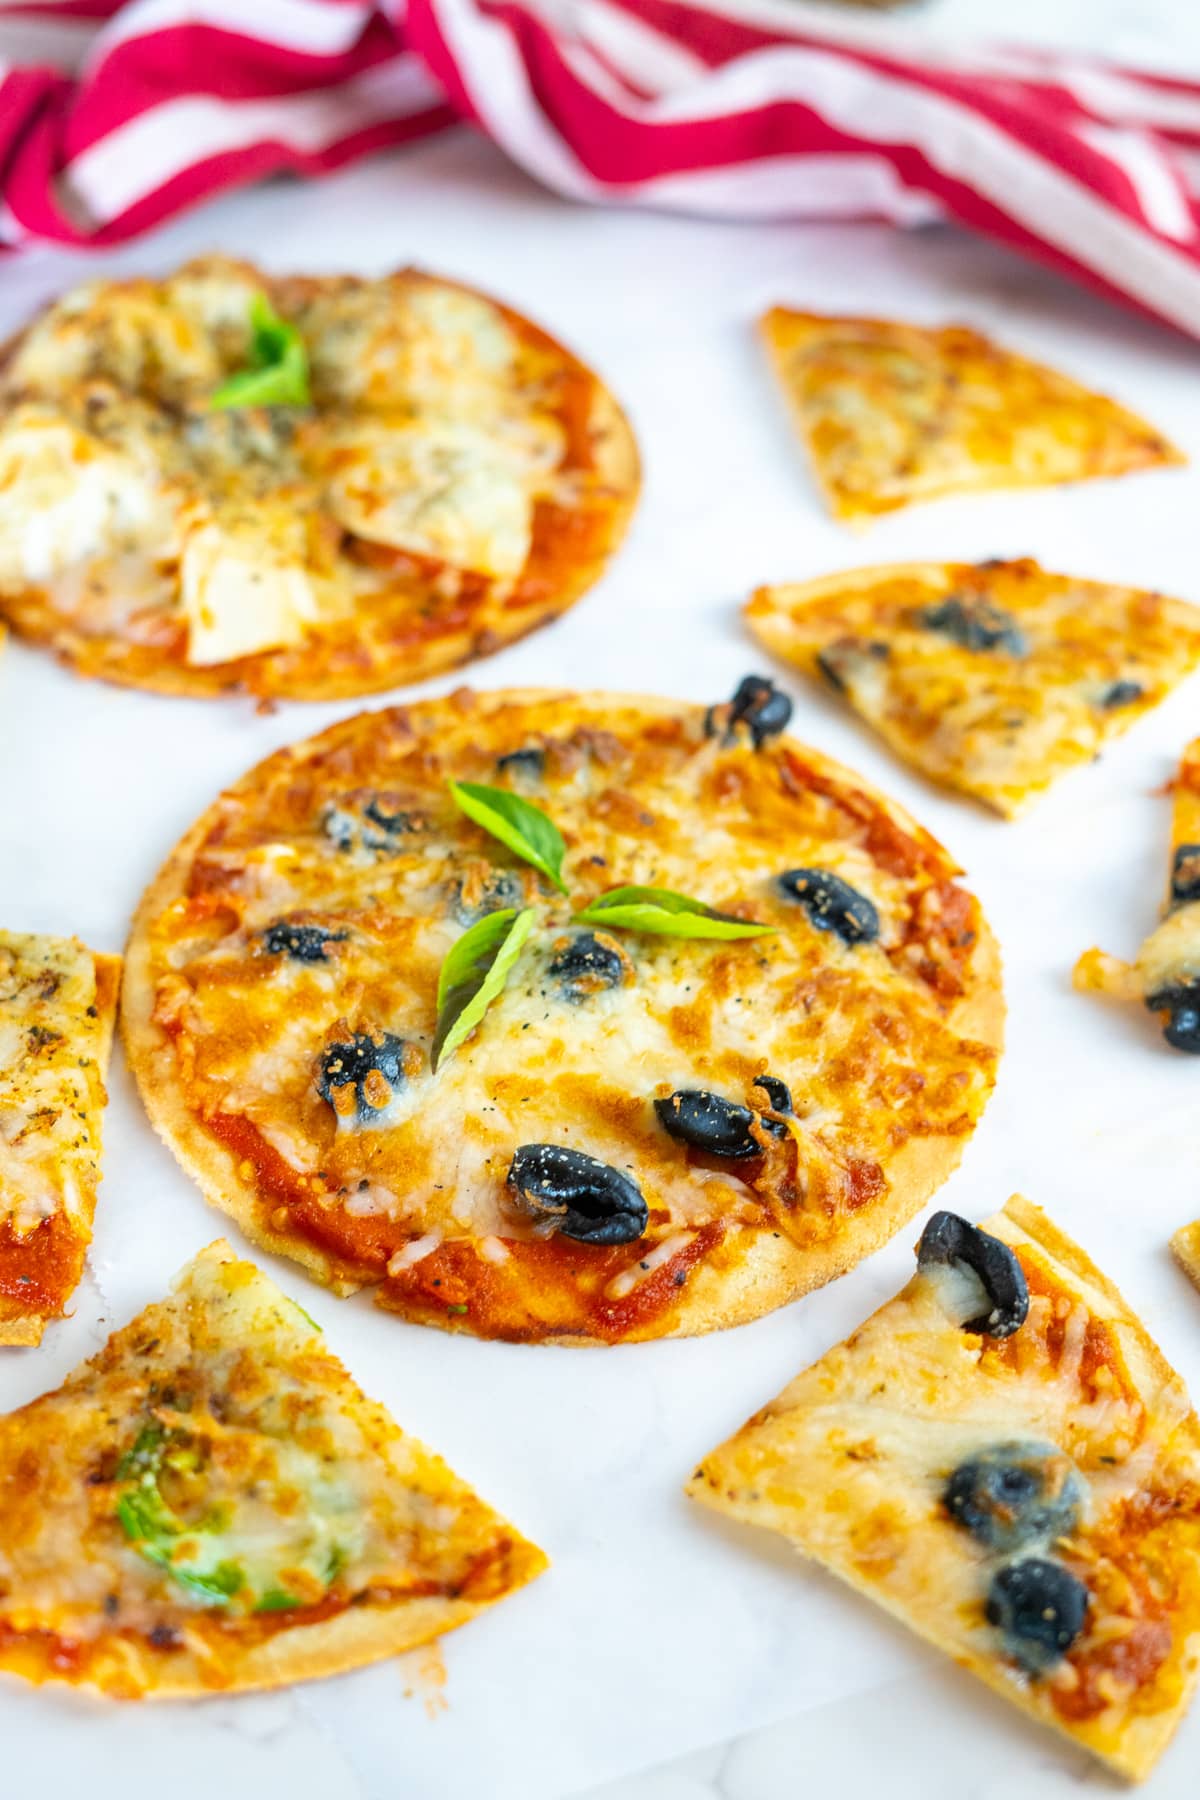 A tortilla pizza cooked in an air fryer topped with olives.